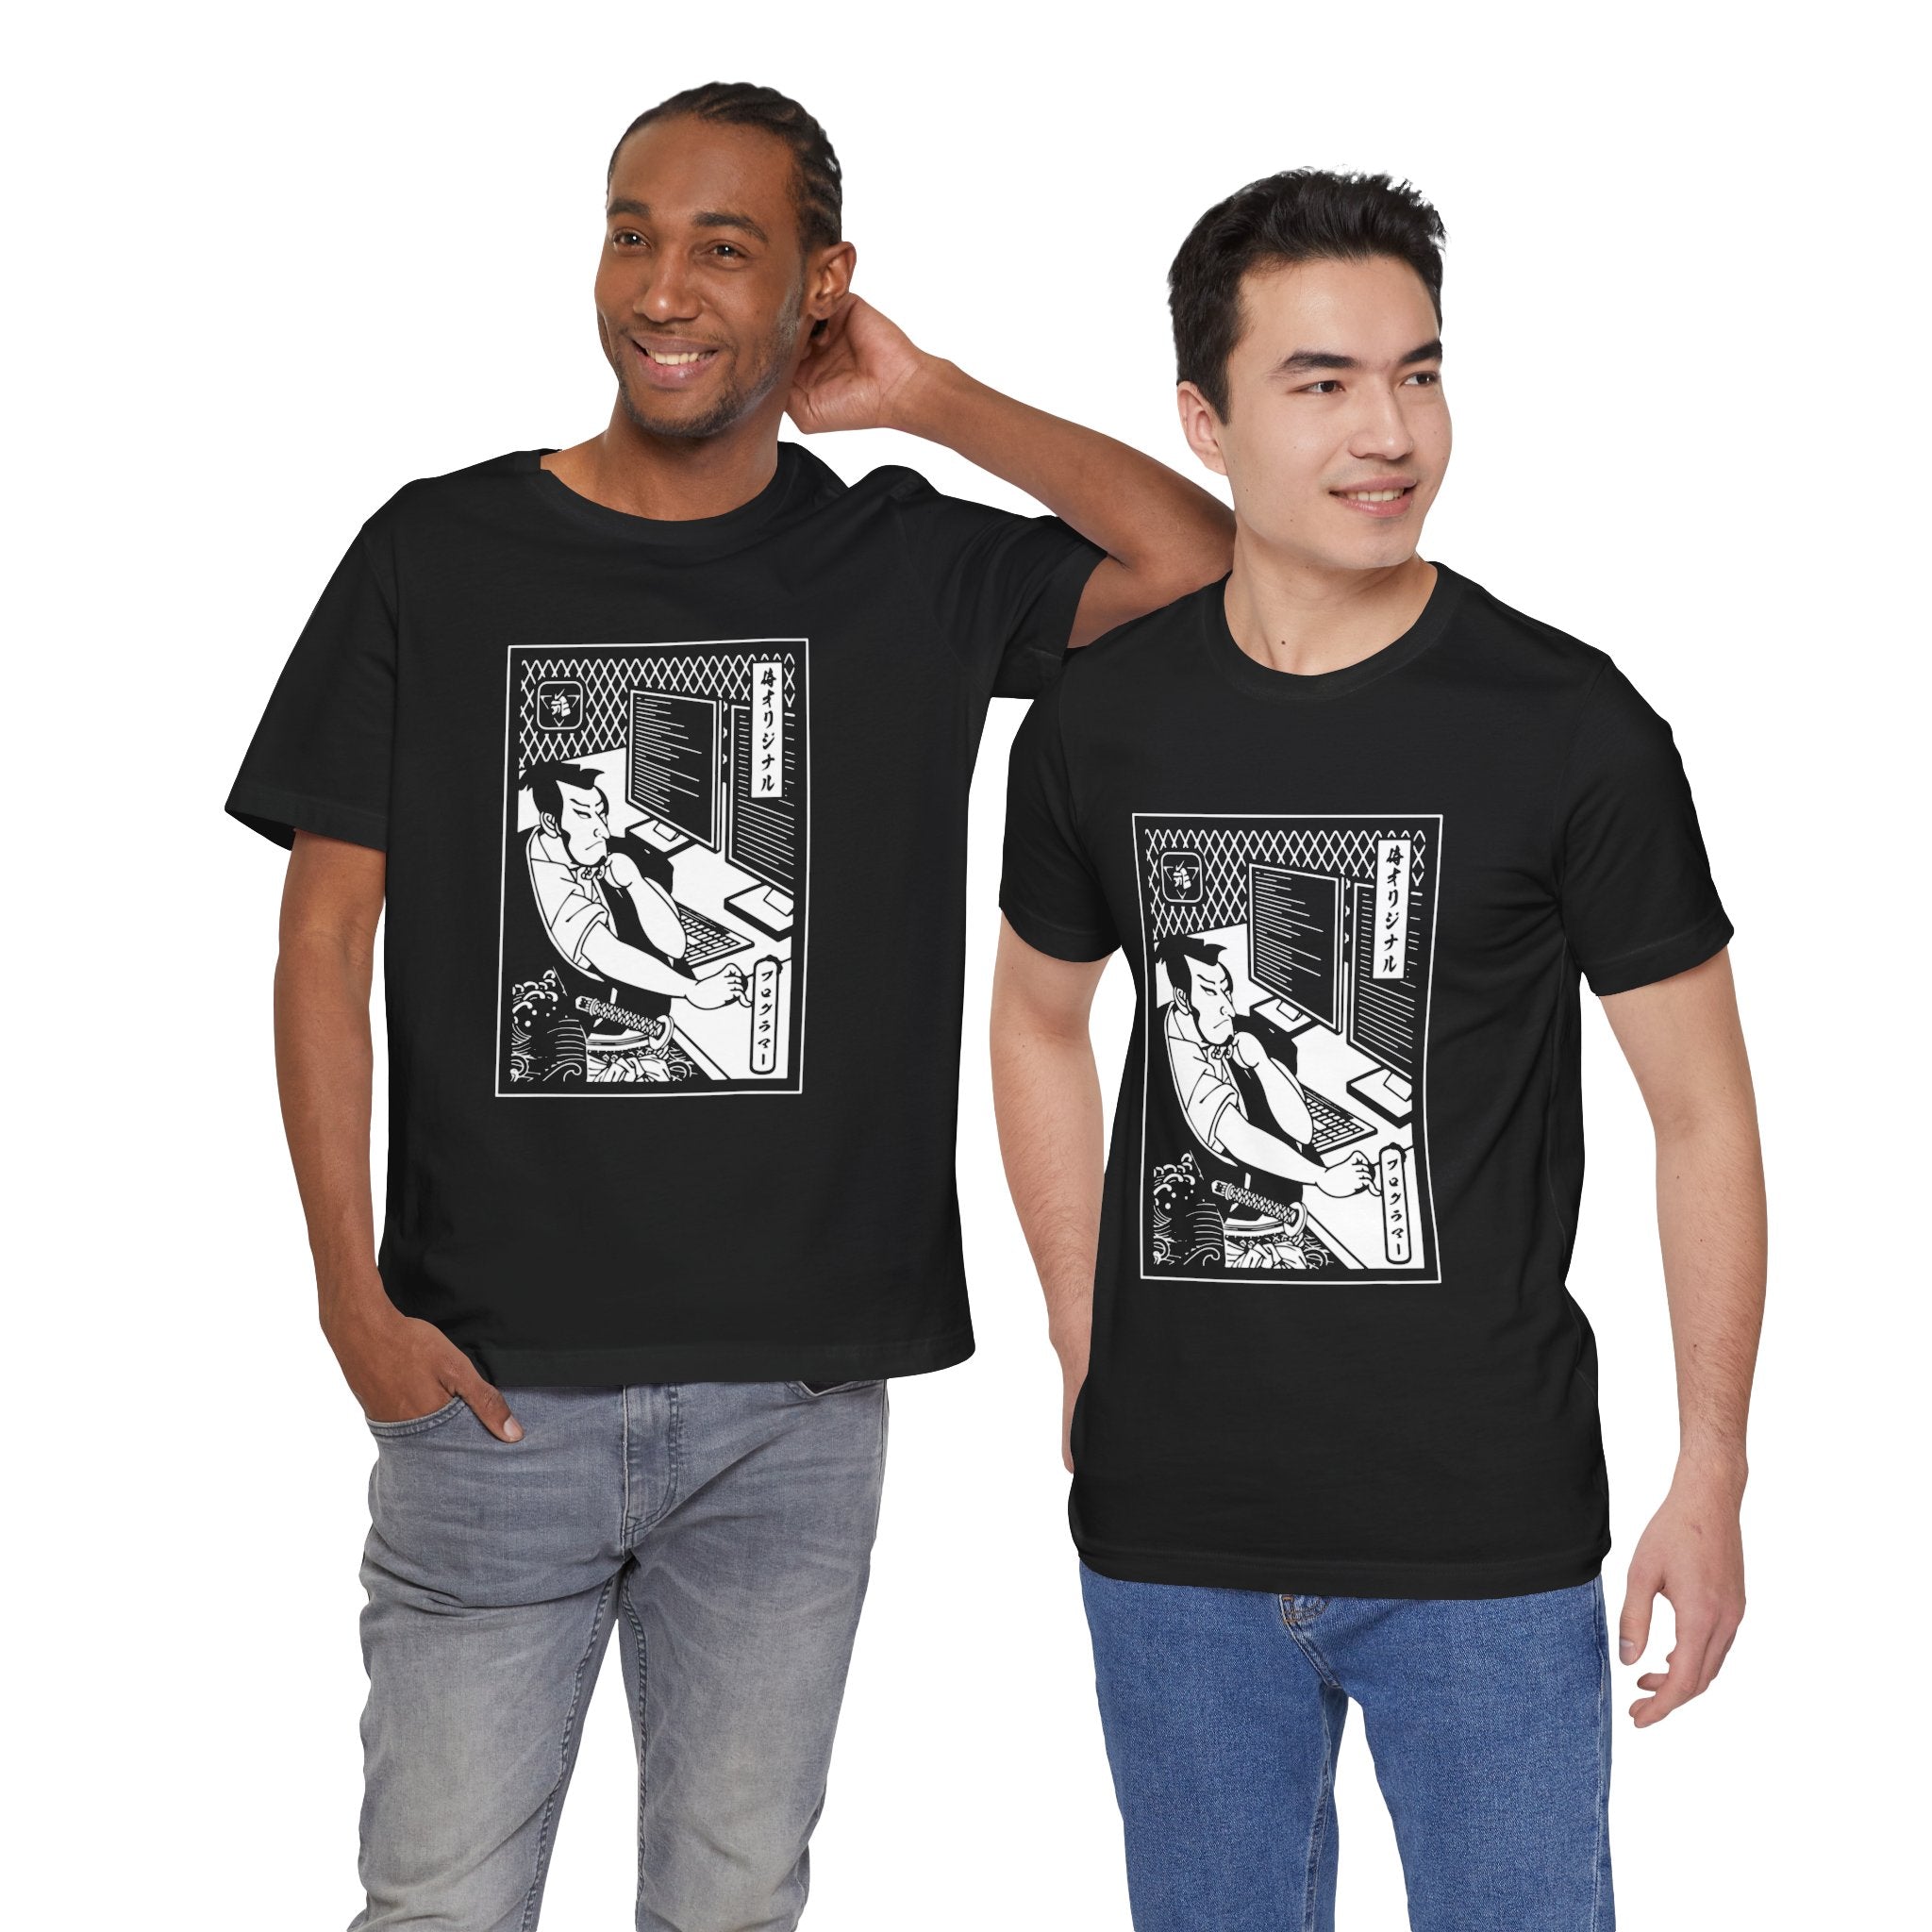 Two men wearing black Coding Samurai T-Shirts with identical graphic prints, standing and smiling at the camera.